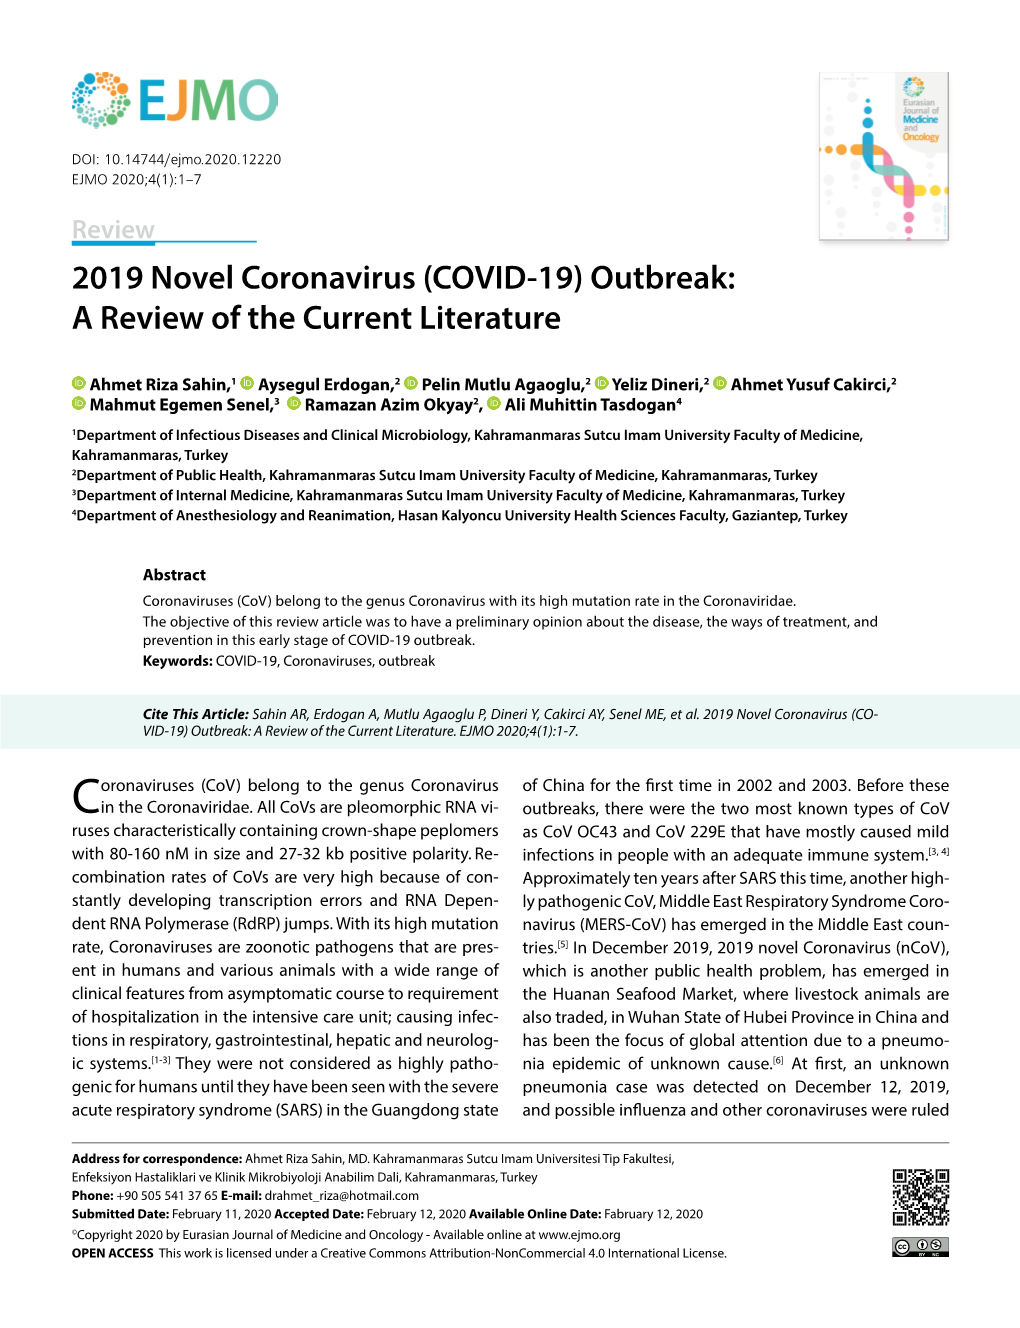 2019 Novel Coronavirus (COVID-19) Outbreak: a Review of the Current Literature